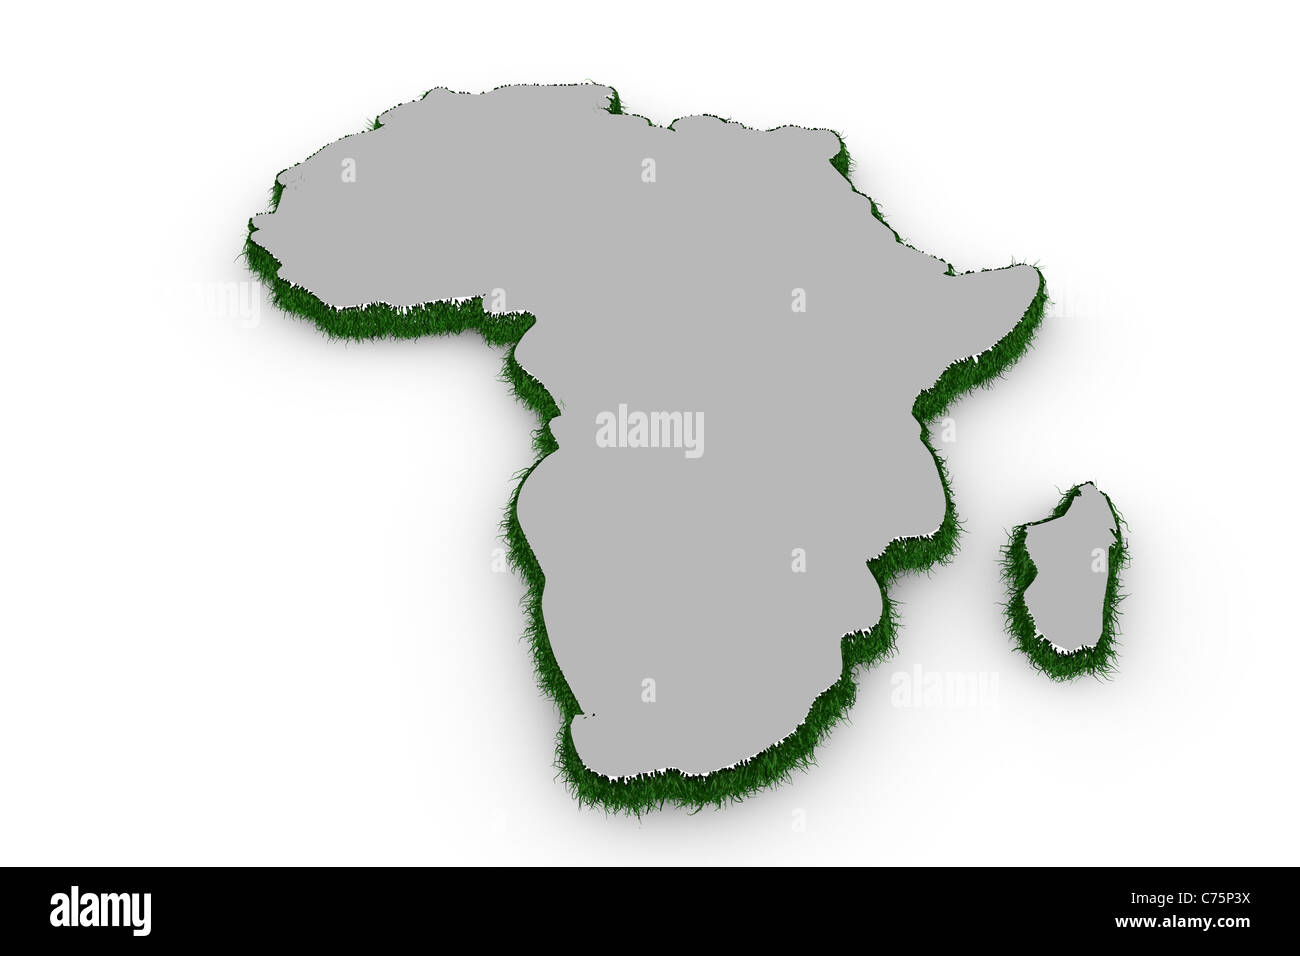 Africa map with grass in 3d Stock Photo